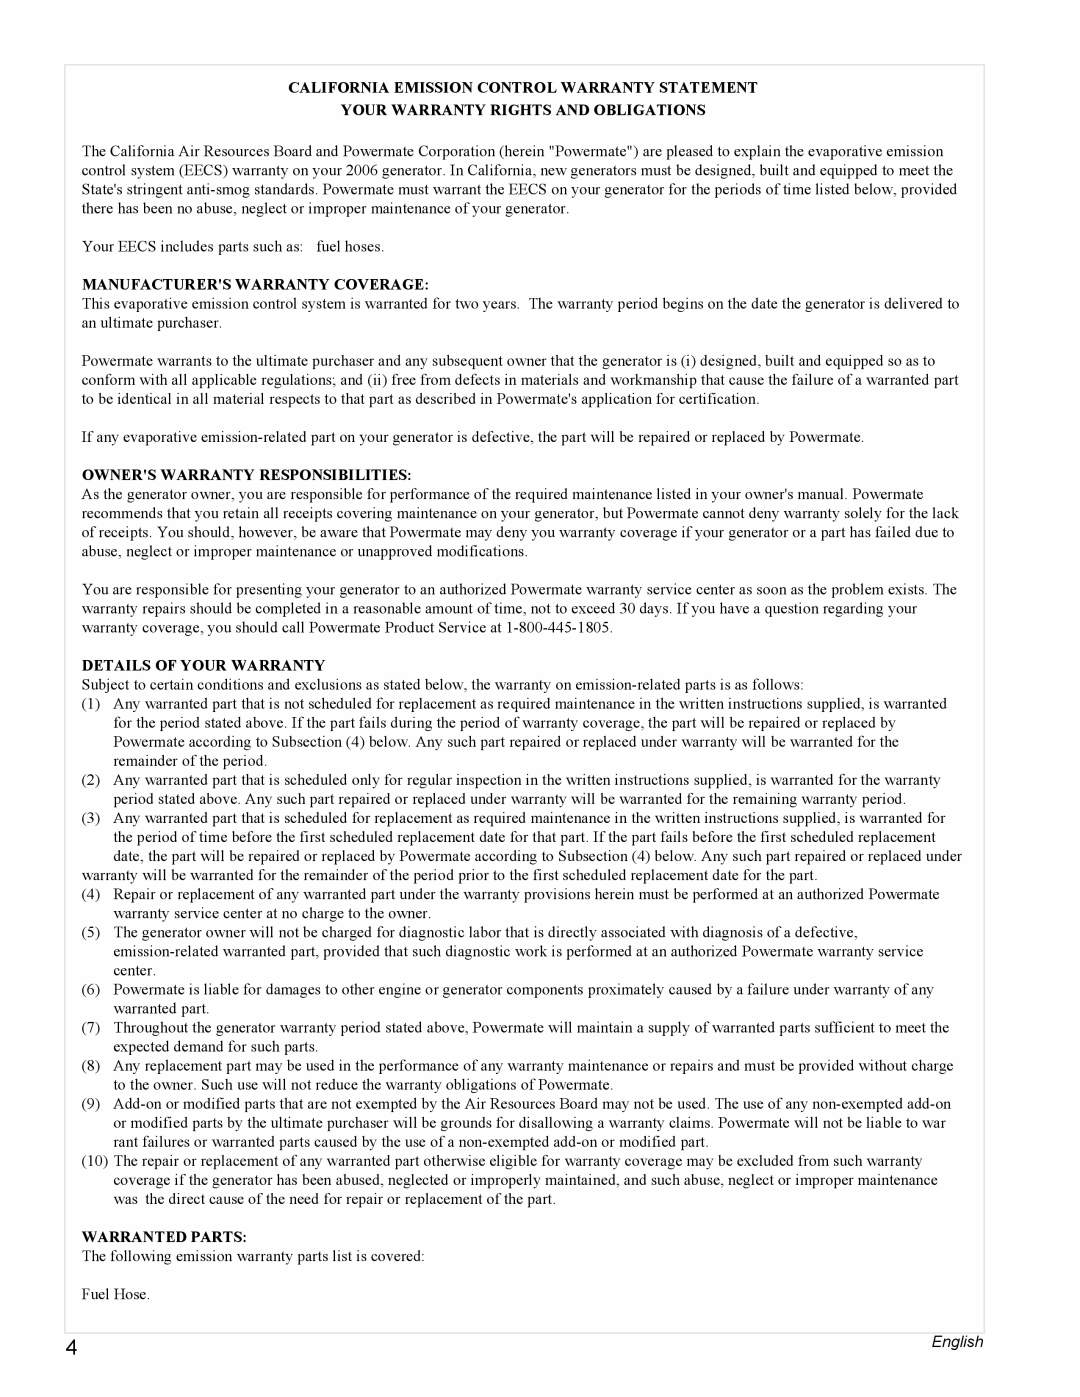 Powermate PMC401856 California Emission Control Warranty Statement, Your Warranty Rights And Obligations, Warranted Parts 